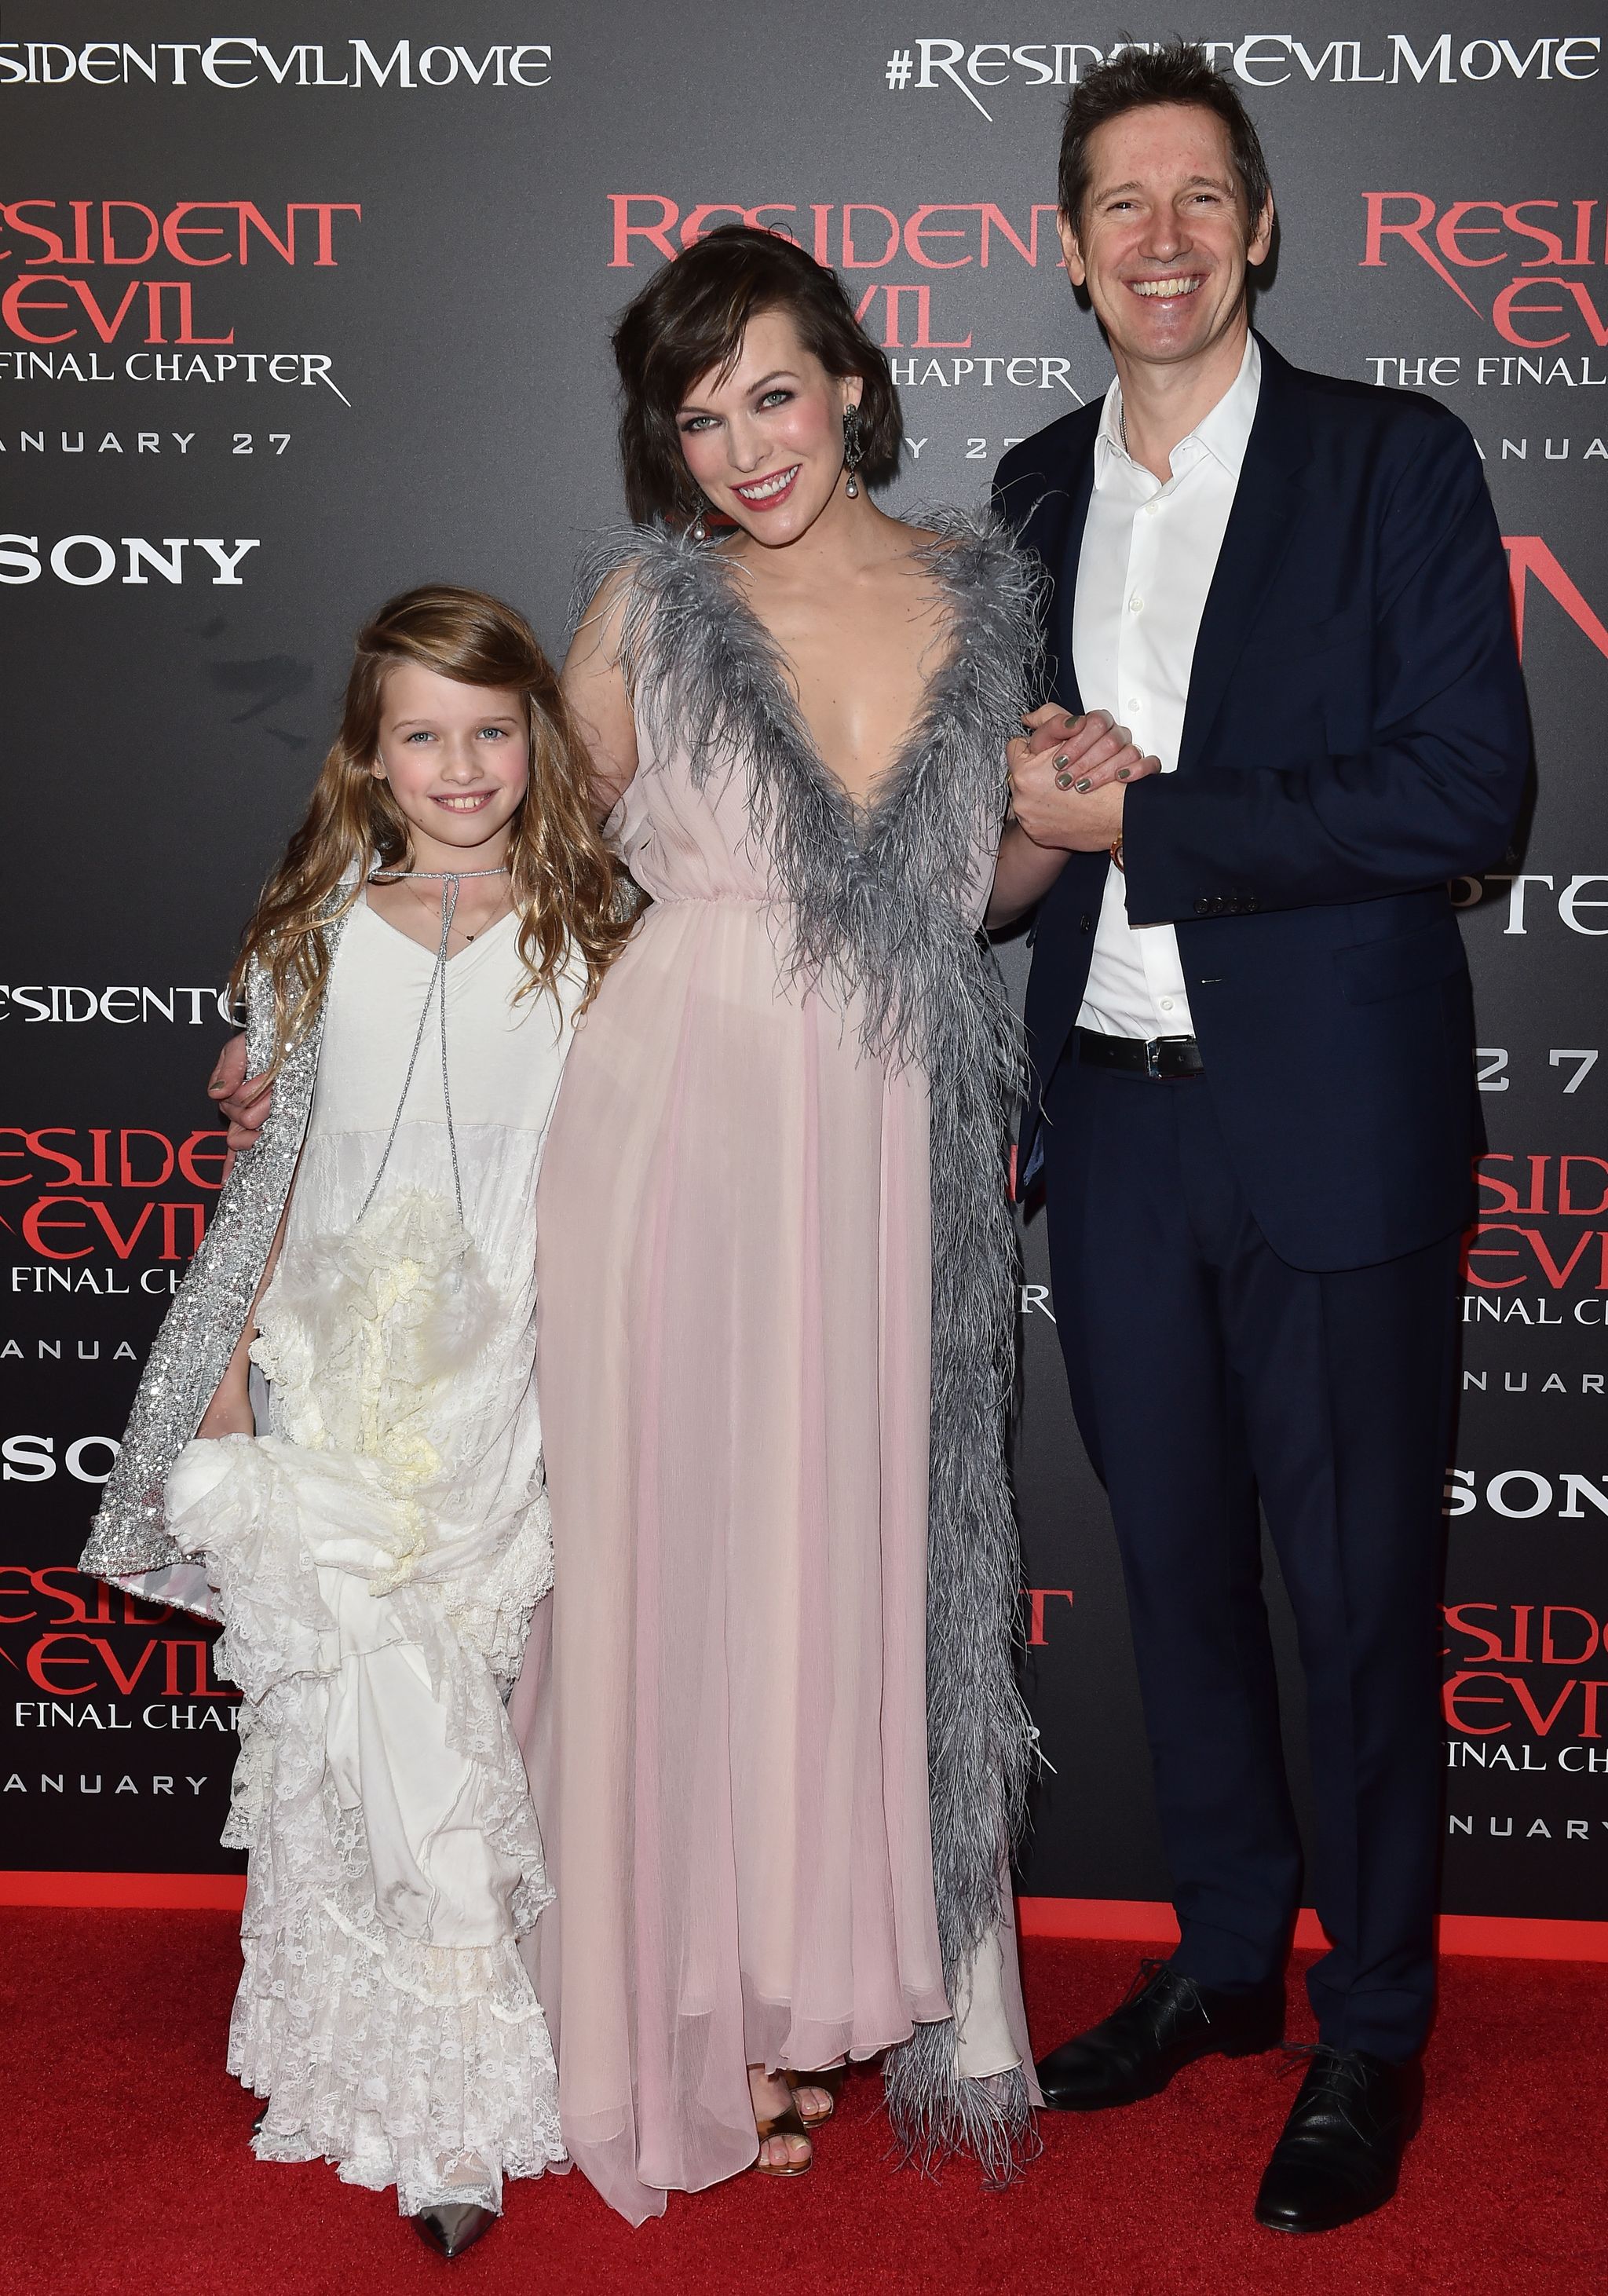 Premiere Of Sony Pictures Releasing's "Resident Evil: The Final Chapter"